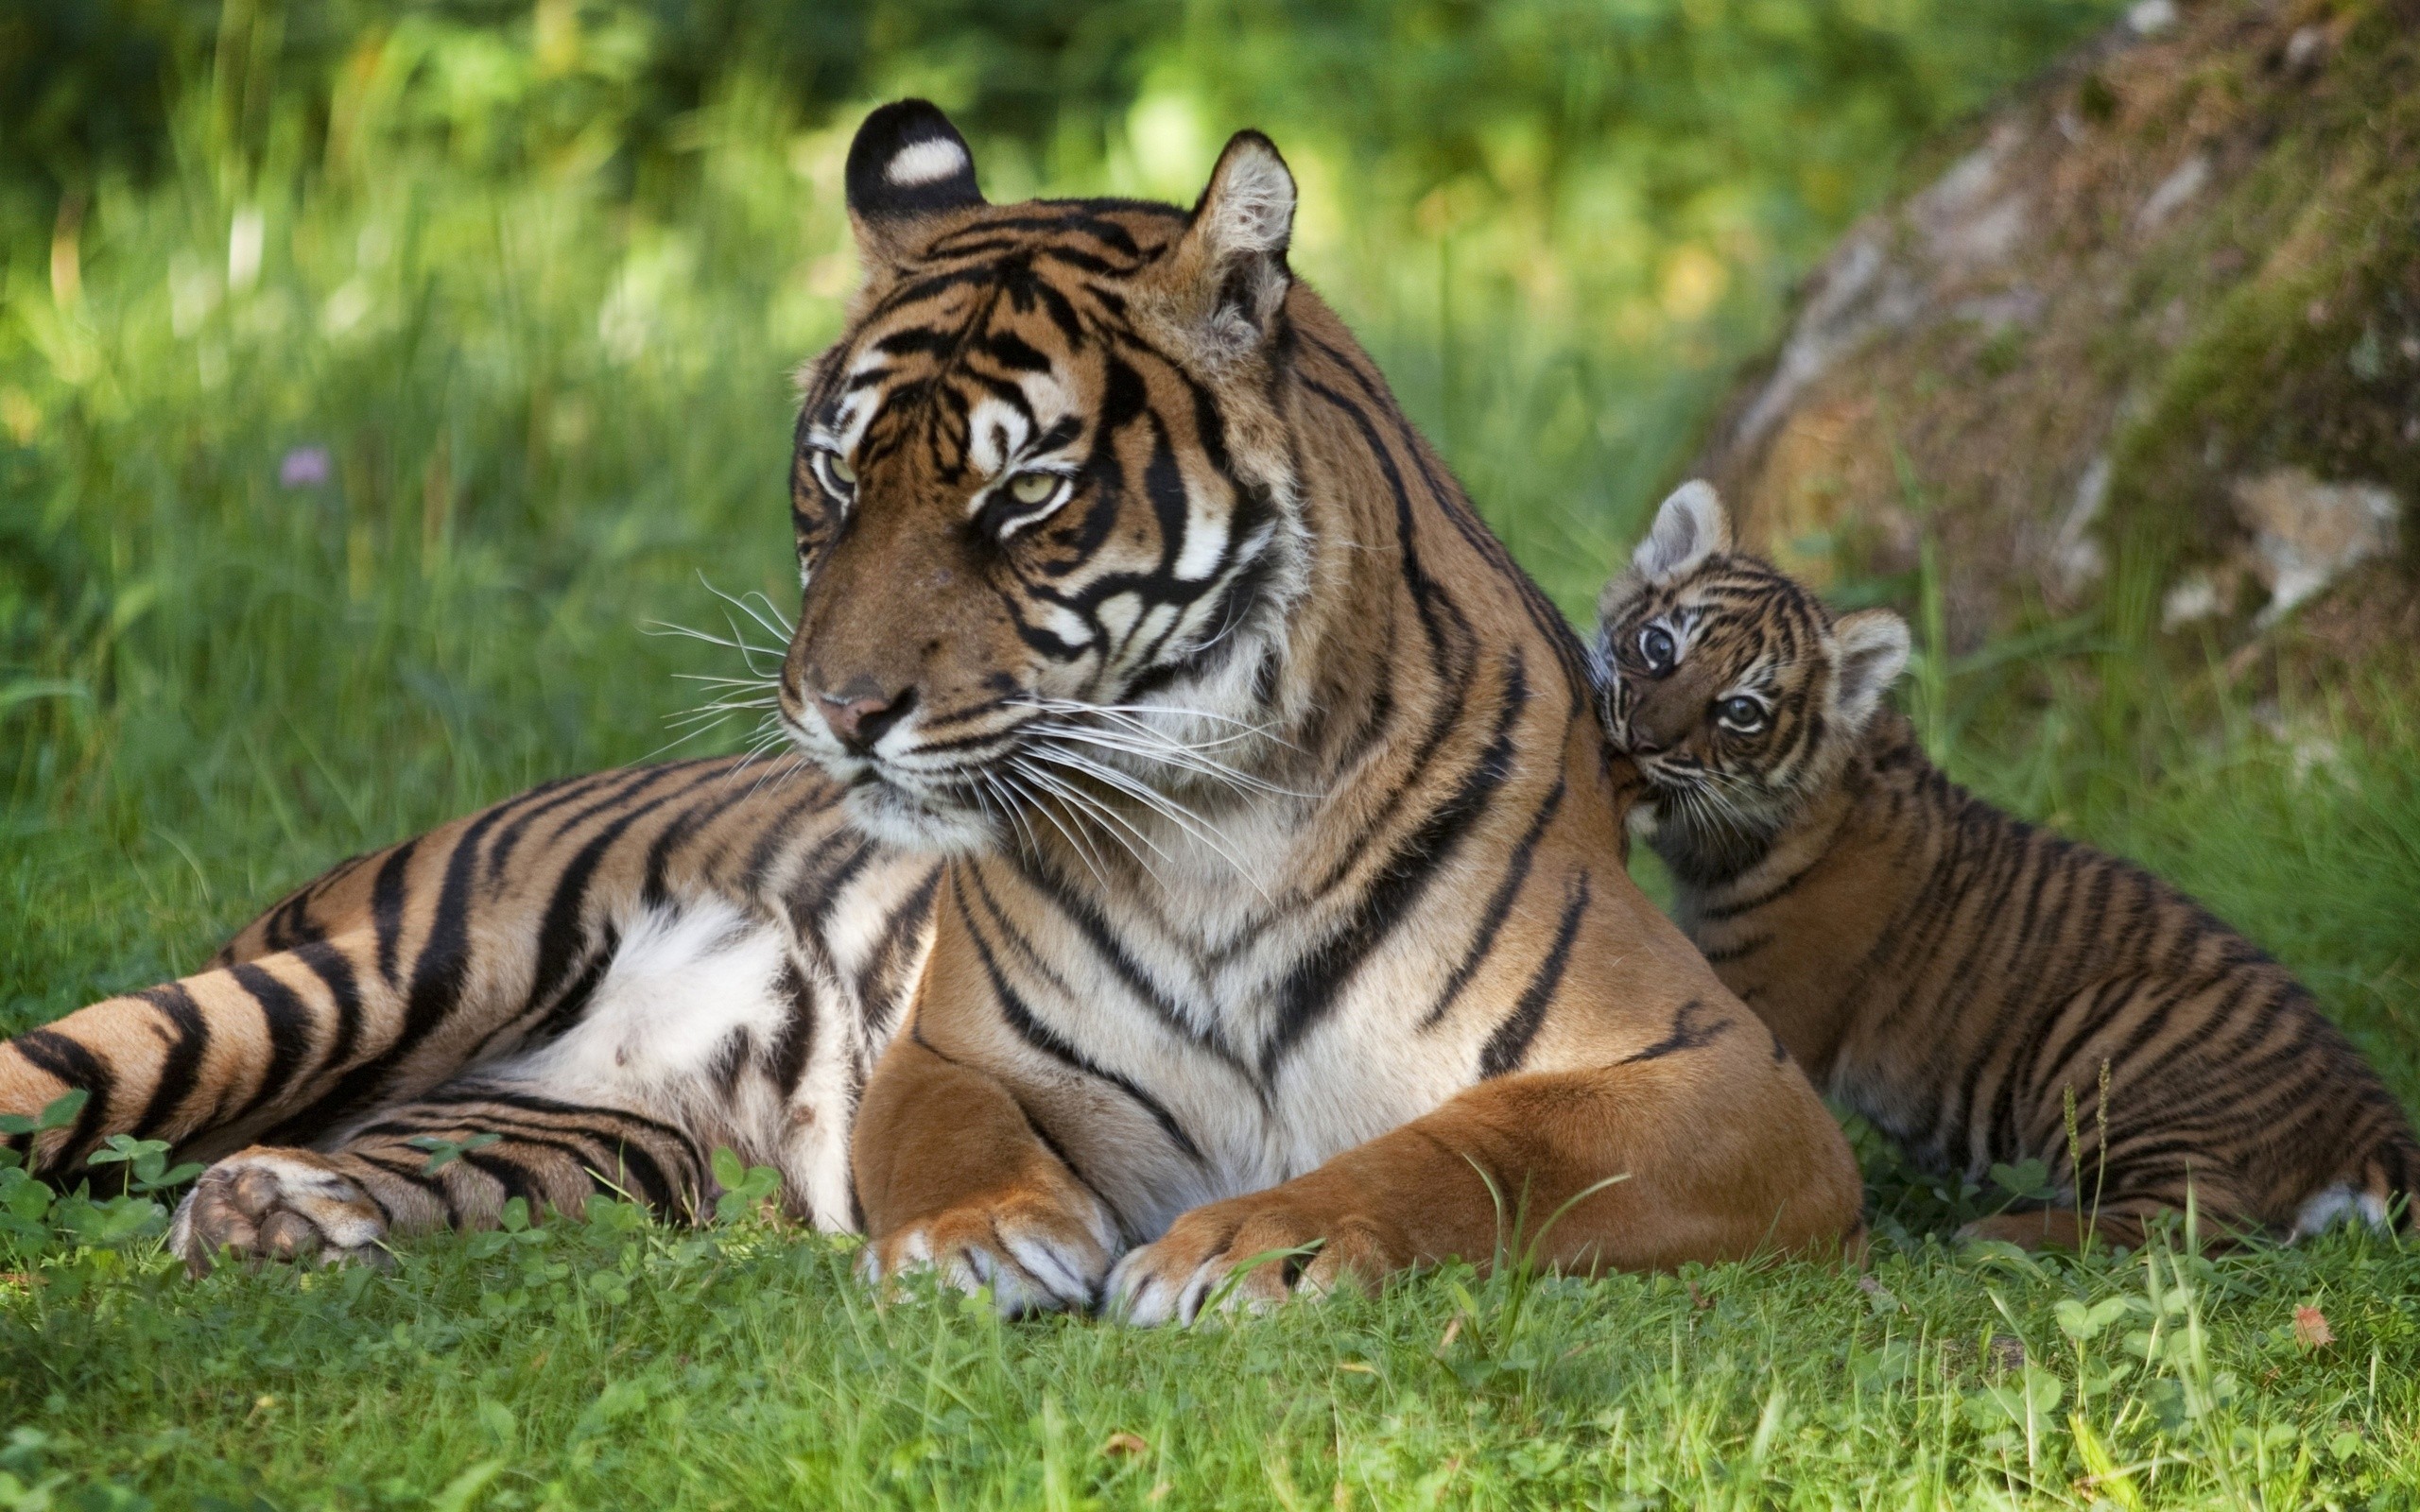 tigers, Tiger, Baby, Family, Grass, Cats Wallpaper